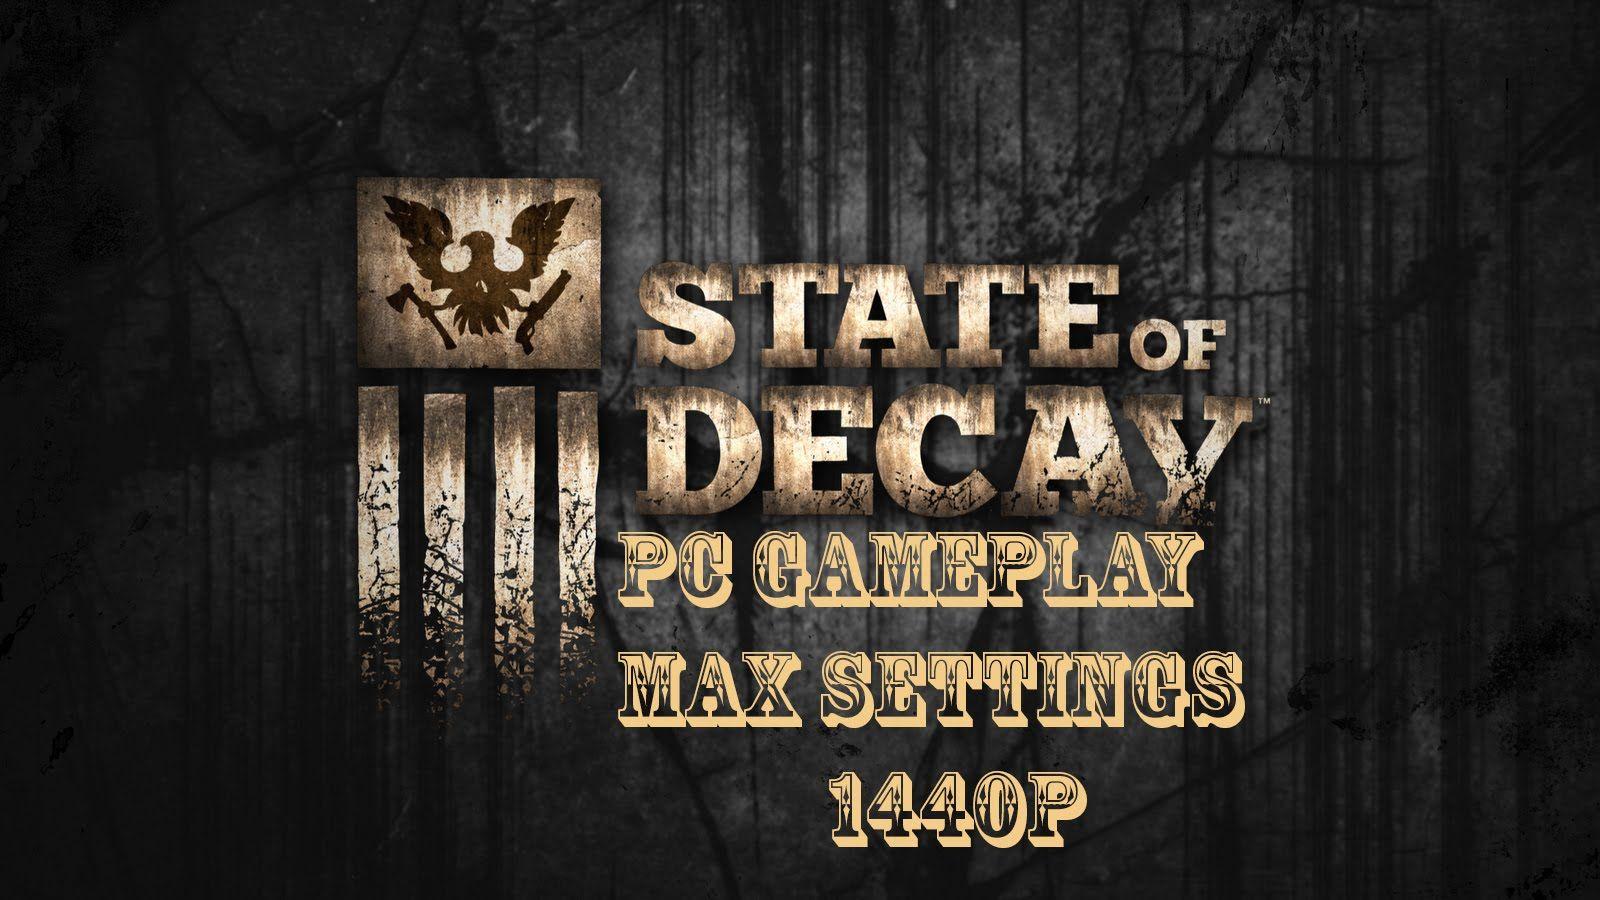 State Of Decay PC gameplay max settings